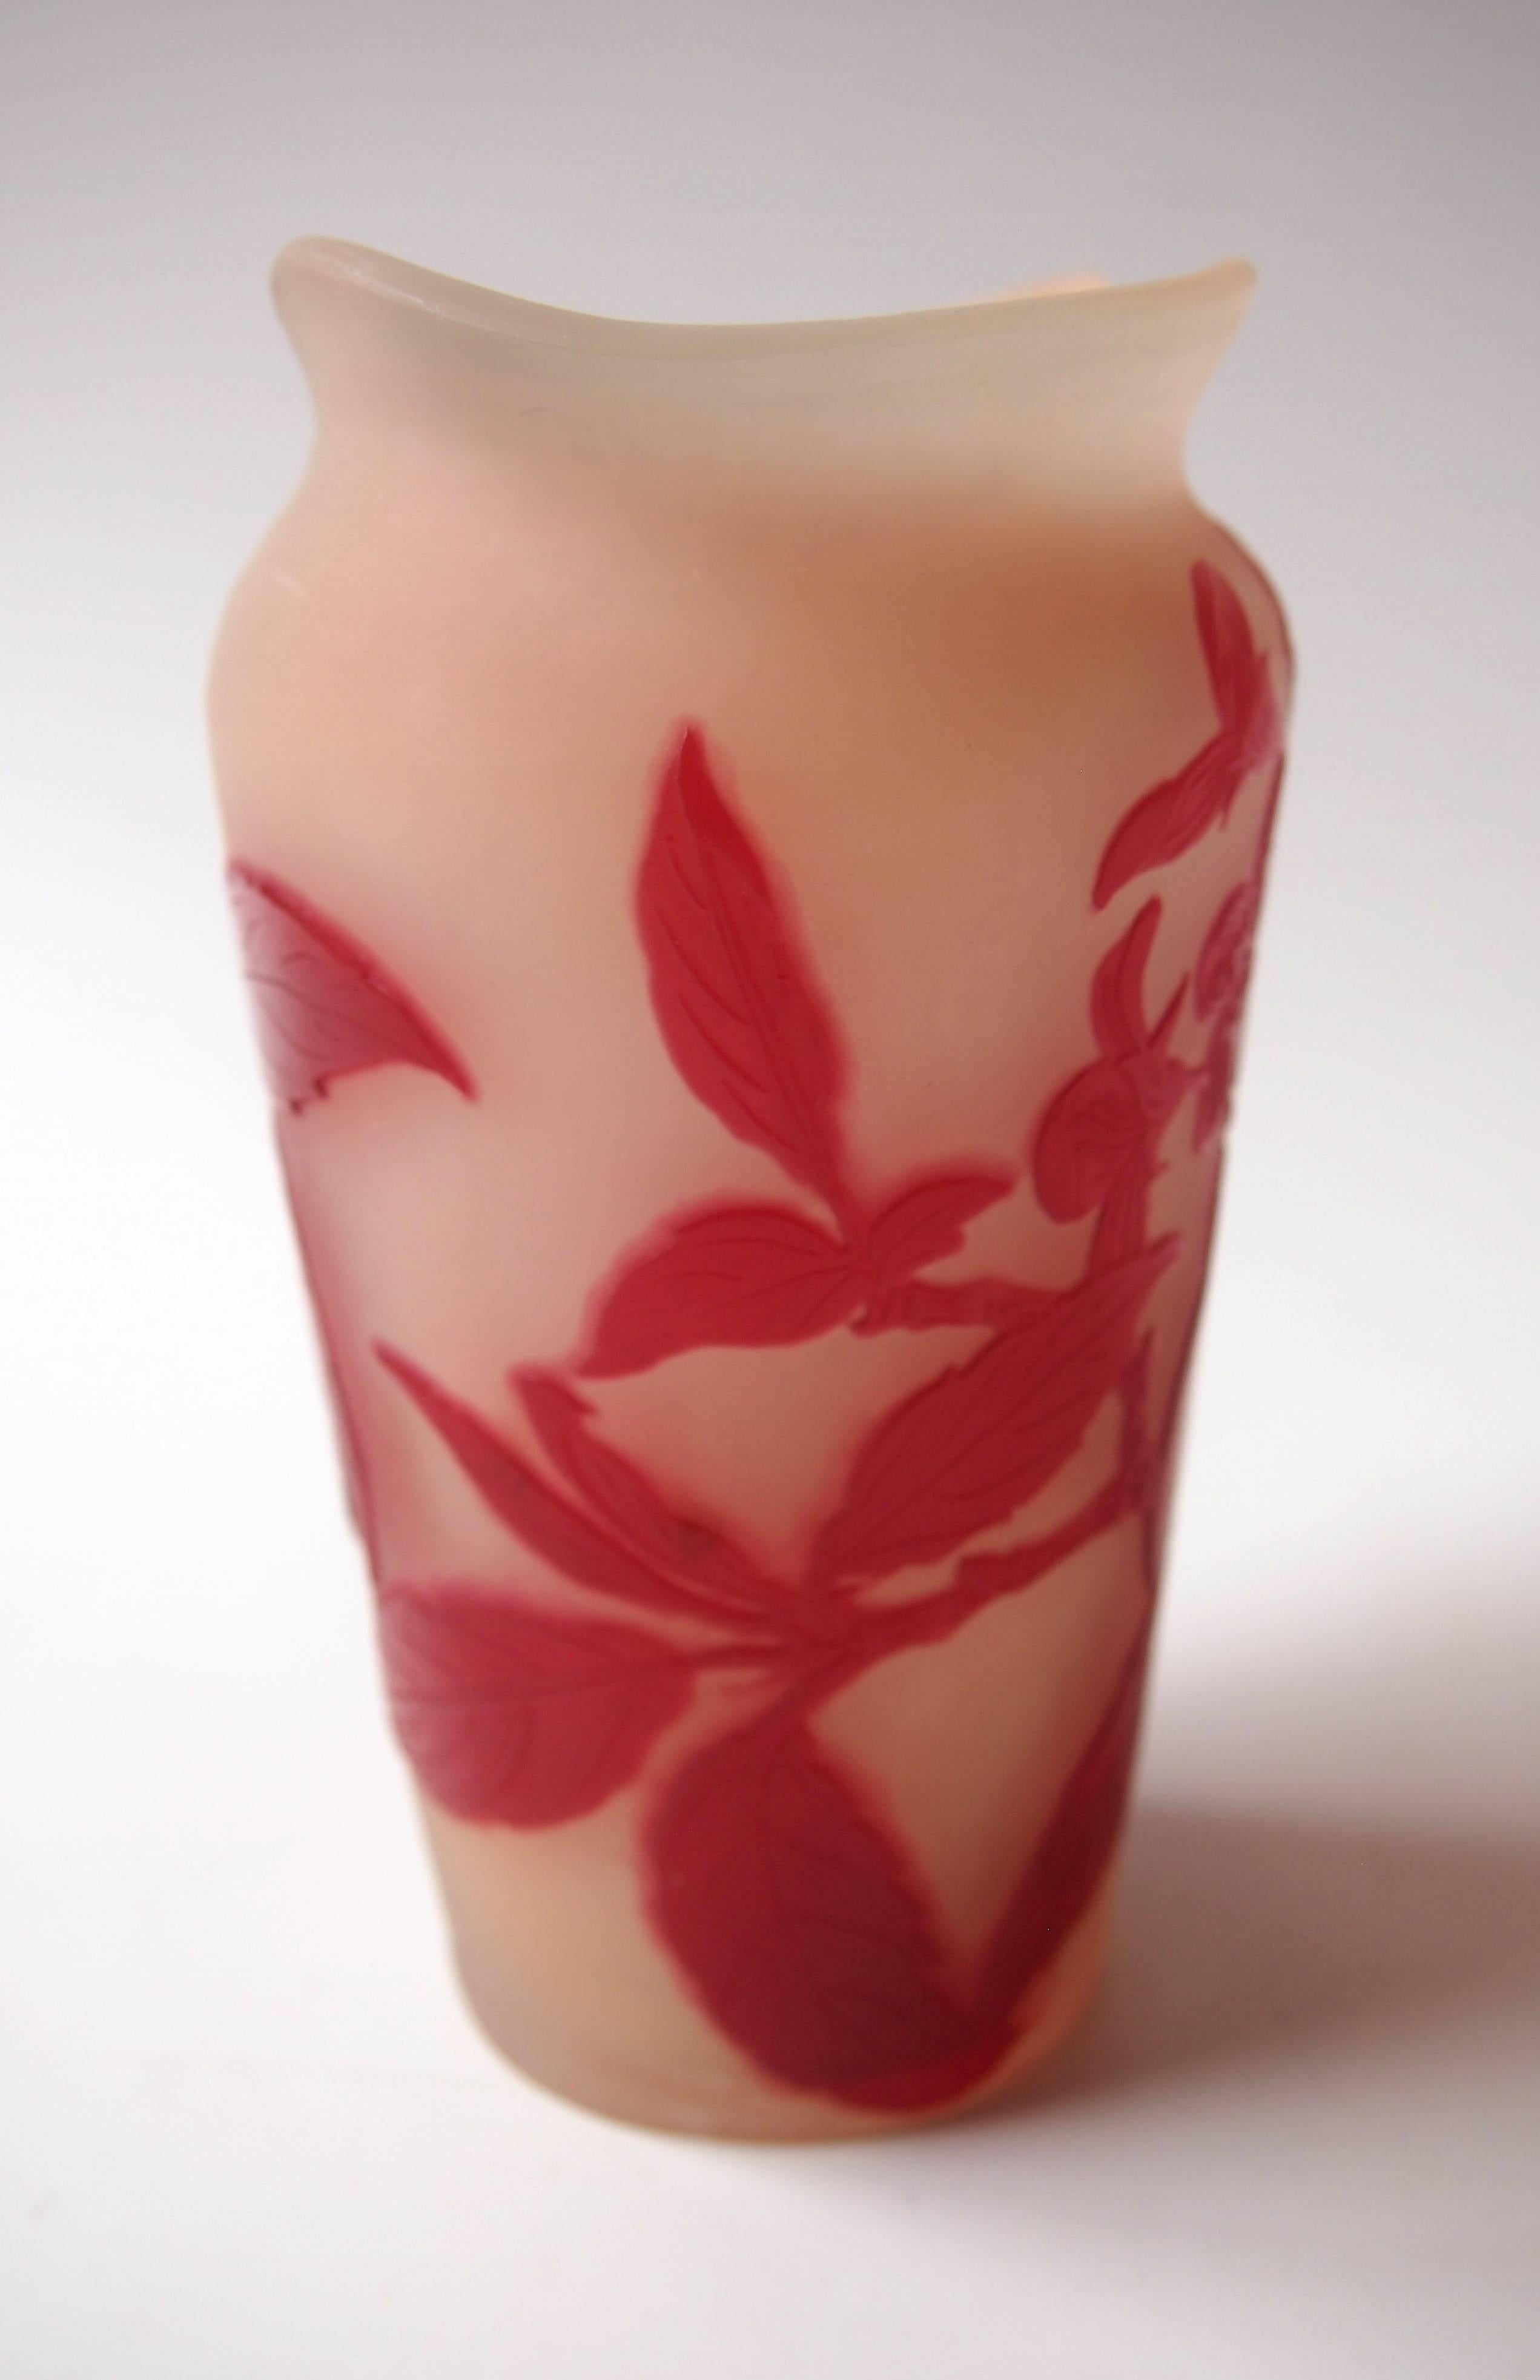 French Emile Galle Art Nouveau Cameo Red and White Vase